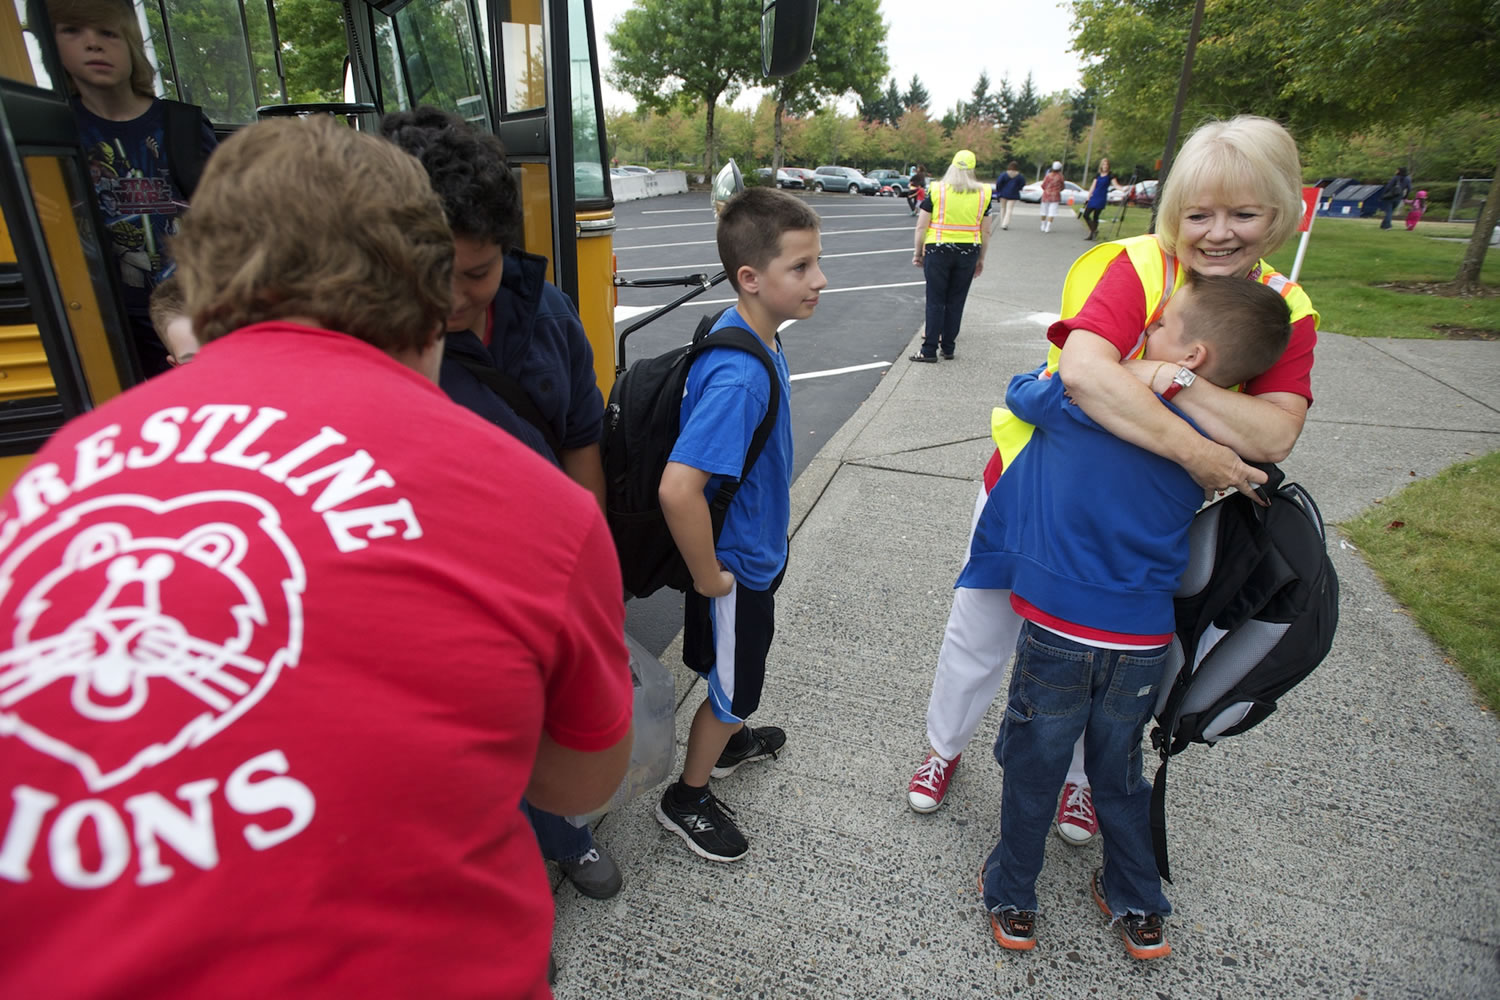 Jane Olschewsky gives returning 5th grader Josh Krzysiak, 10, a big hug as he gets off the bus on the first day of school at the temporary Crestline Elementary today.